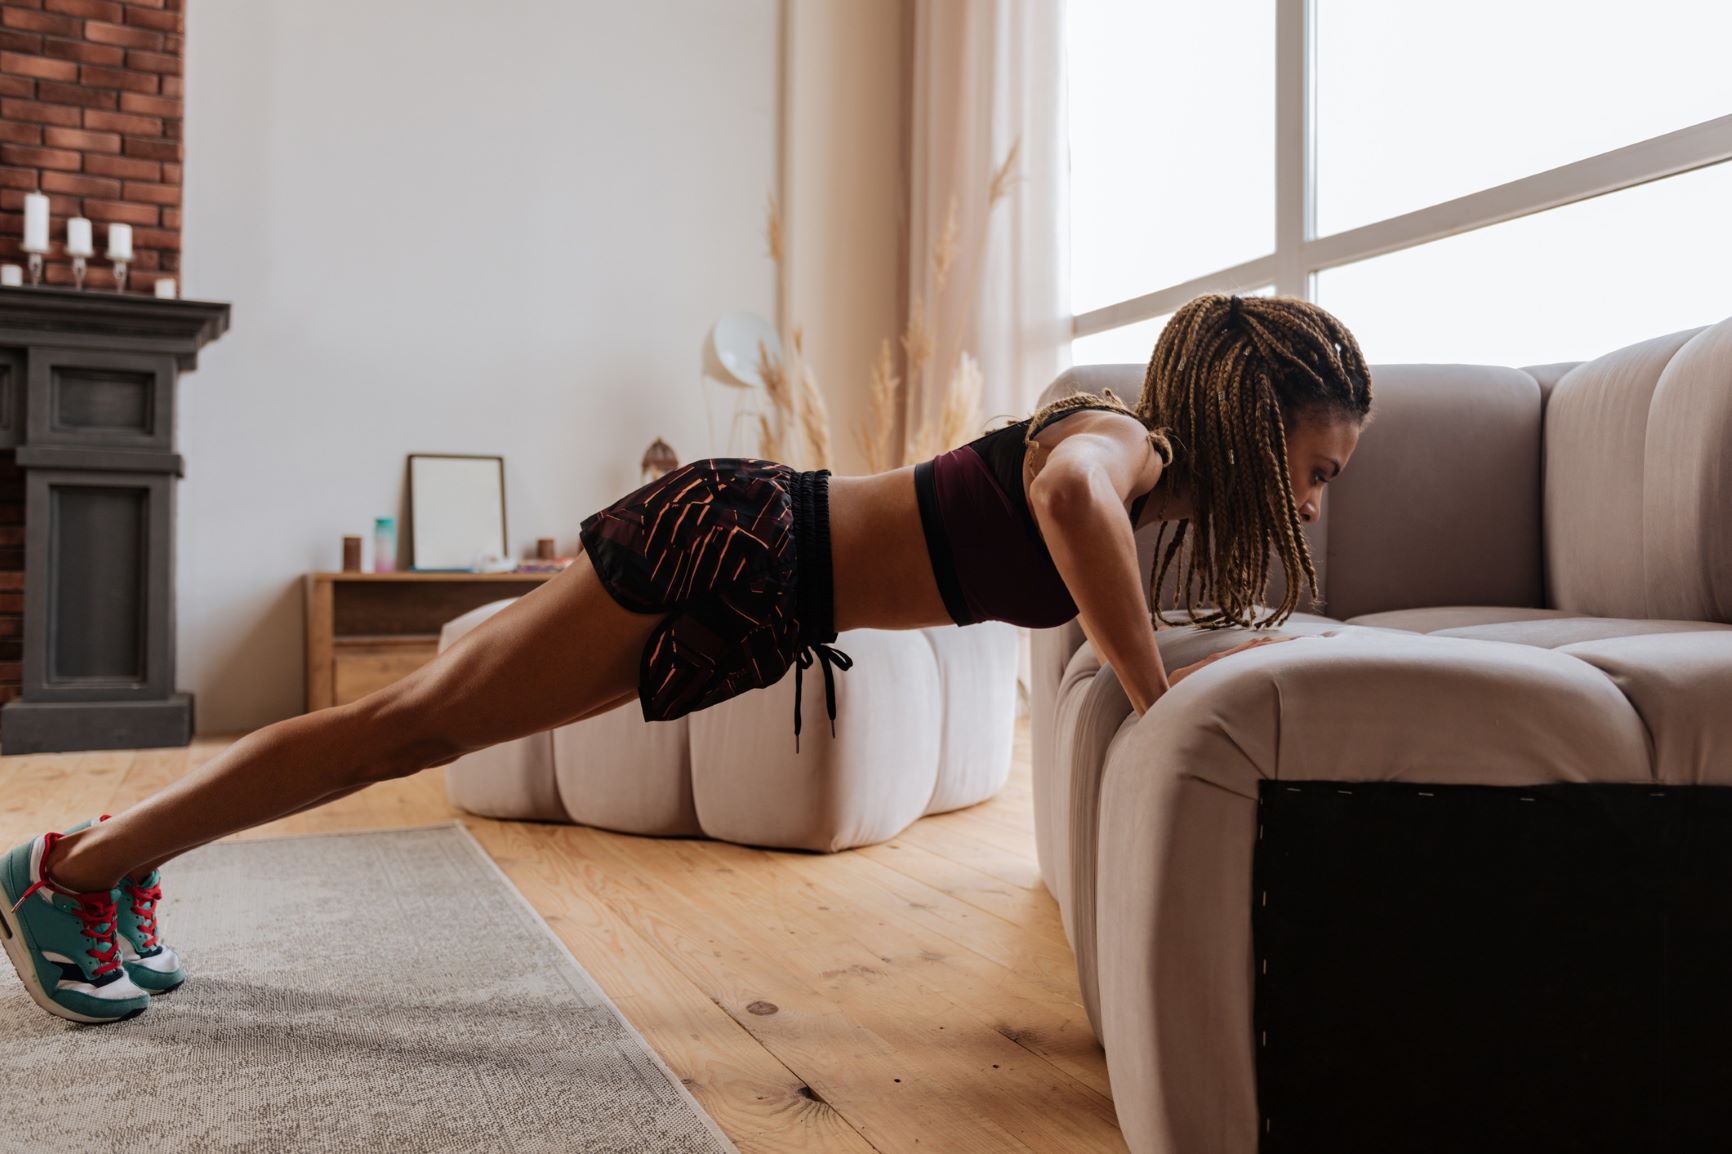 Woman doing a push-up in her home on her couch